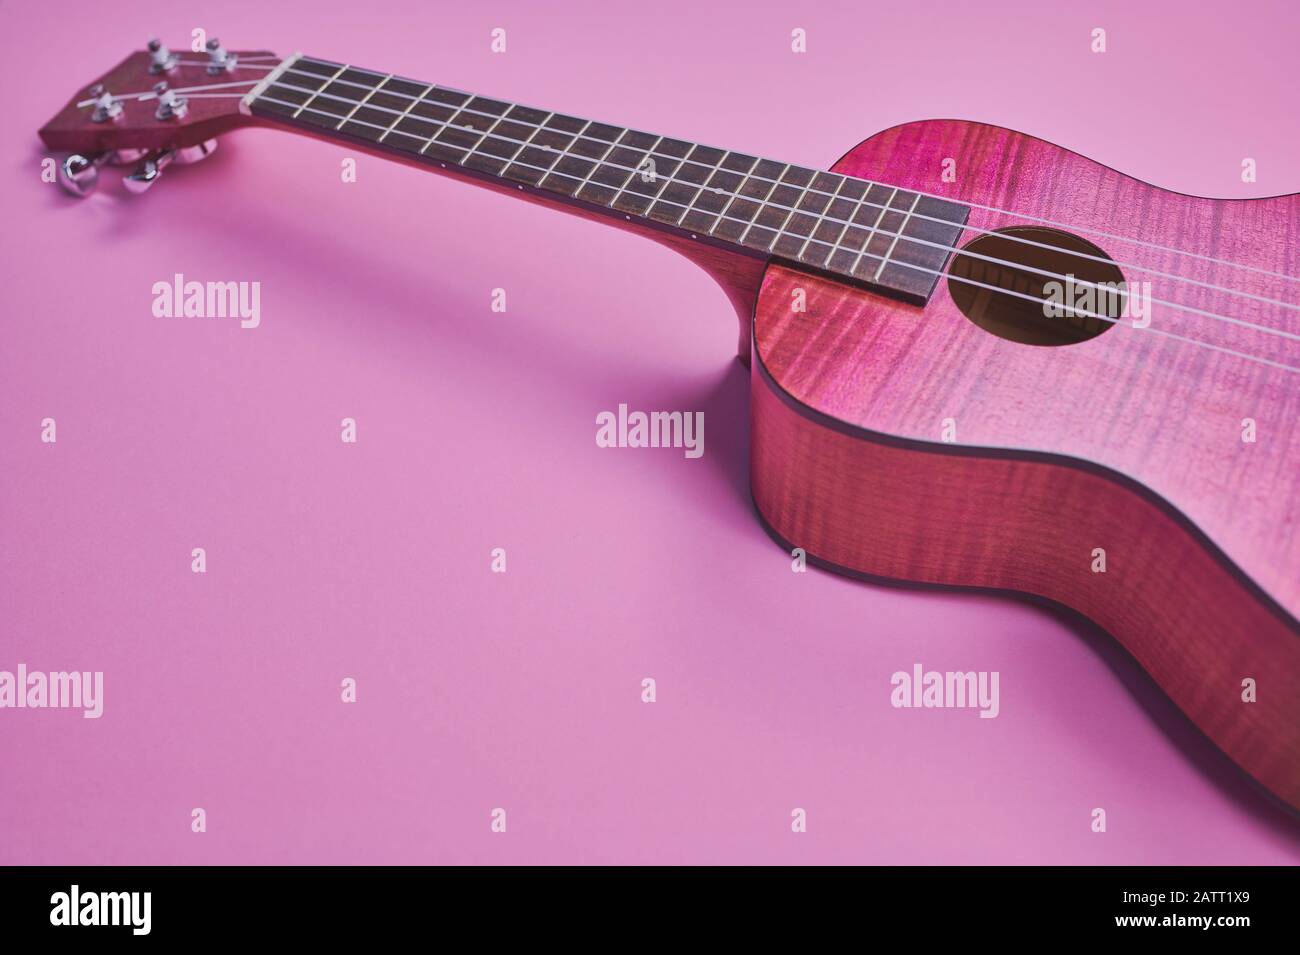 color photo of a pink ukulele on pink background in a matt style Stock Photo